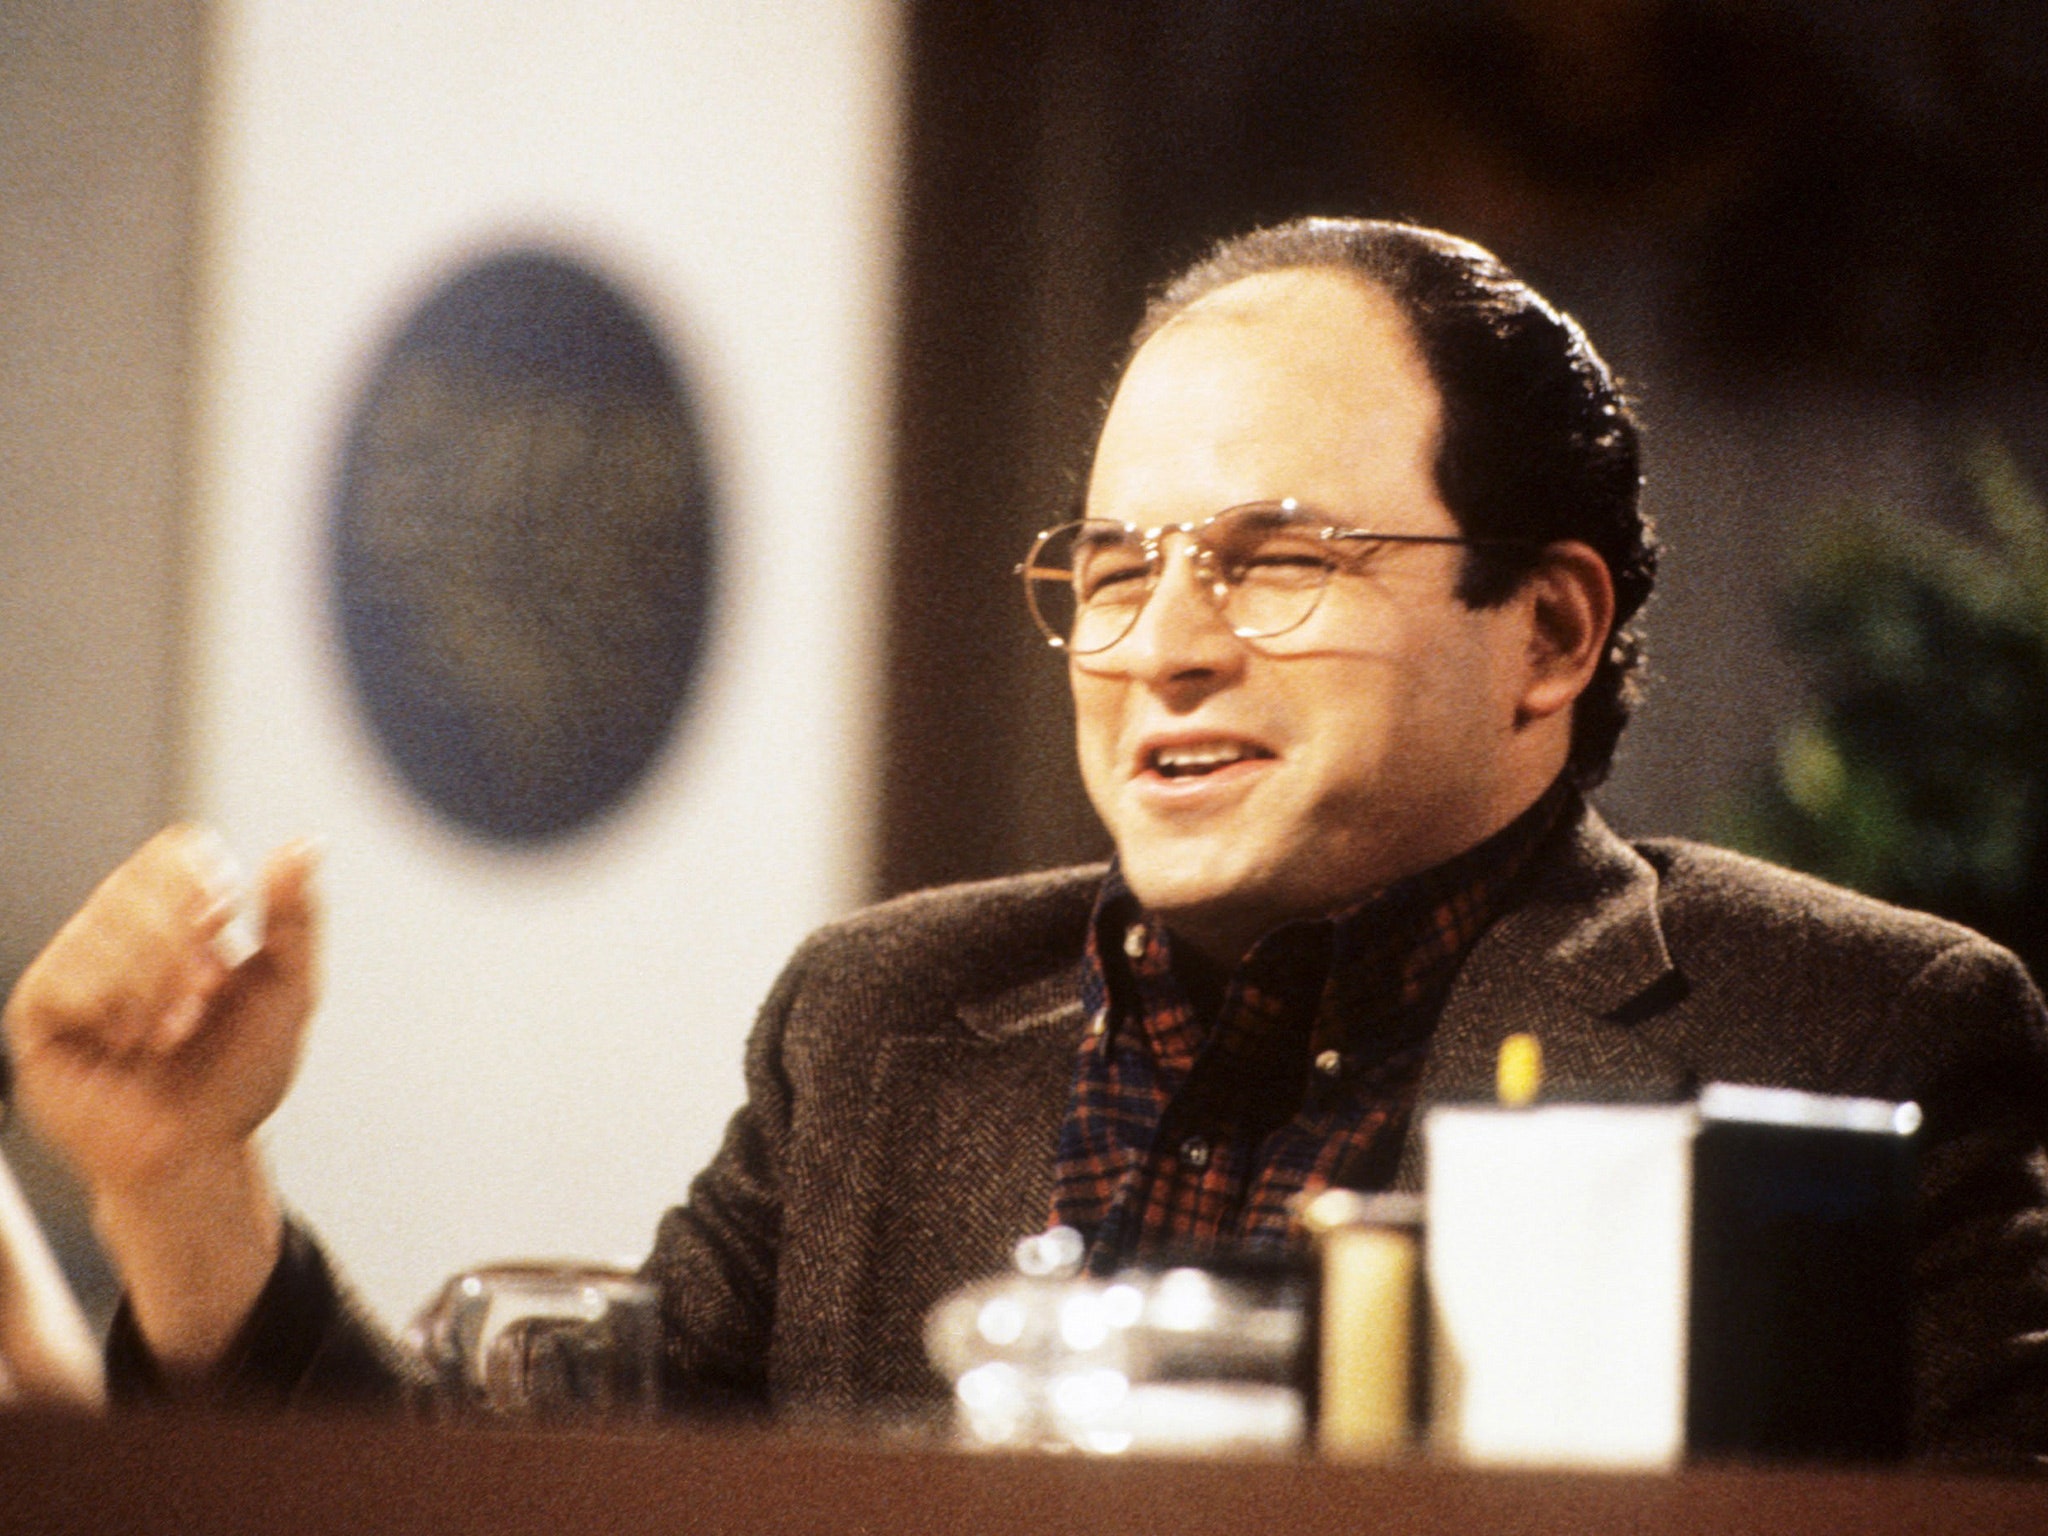 Seinfeld' Character George Costanza Gets His Own Bar in Melbourne. Condé Nast Traveler